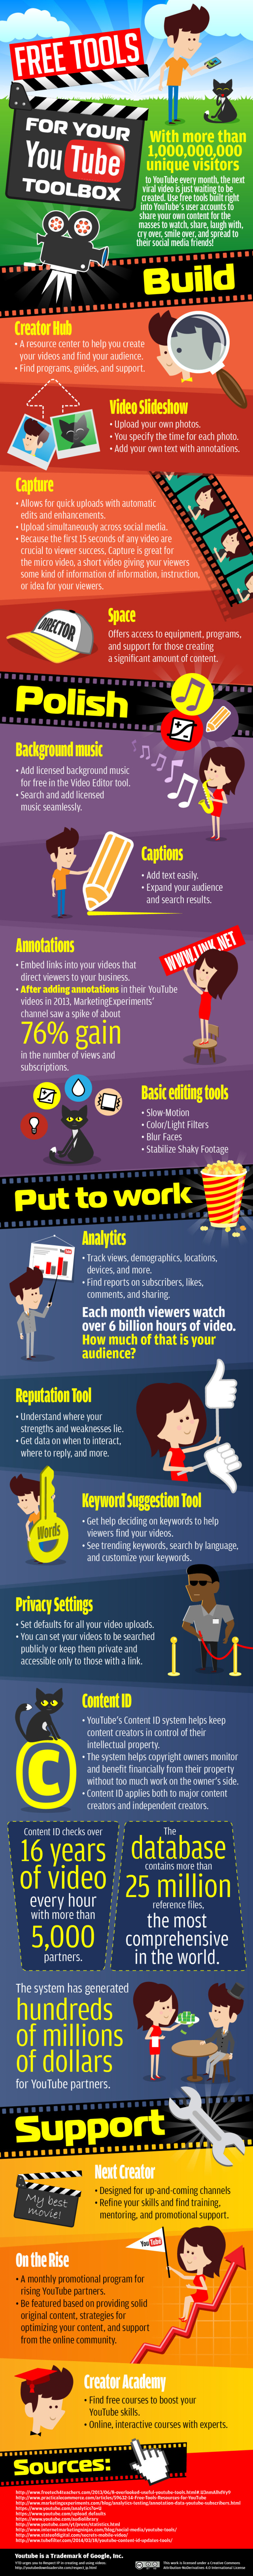 infographic-youtube-tools